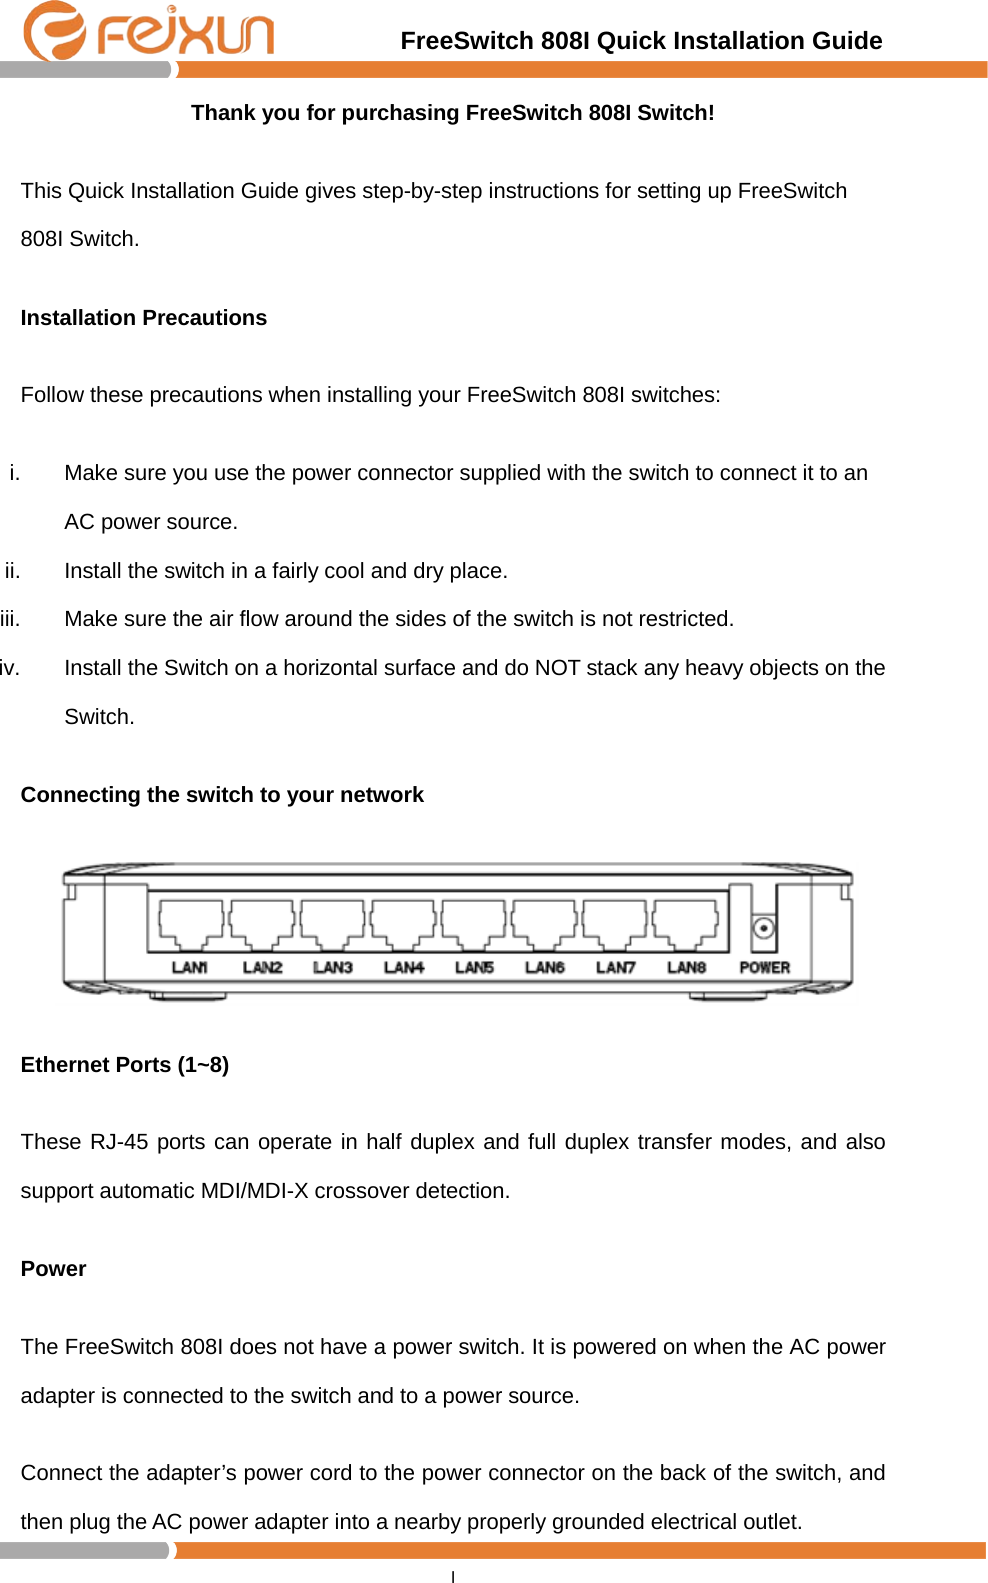                                         FreeSwitch 808I Quick Installation Guide I  Thank you for purchasing FreeSwitch 808I Switch! This Quick Installation Guide gives step-by-step instructions for setting up FreeSwitch 808I Switch.   Installation Precautions Follow these precautions when installing your FreeSwitch 808I switches: i. Make sure you use the power connector supplied with the switch to connect it to an AC power source. ii. Install the switch in a fairly cool and dry place.   iii. Make sure the air flow around the sides of the switch is not restricted. iv. Install the Switch on a horizontal surface and do NOT stack any heavy objects on the Switch. Connecting the switch to your network    Ethernet Ports (1~8) These RJ-45 ports can operate in half duplex and full duplex transfer modes, and also support automatic MDI/MDI-X crossover detection. Power The FreeSwitch 808I does not have a power switch. It is powered on when the AC power adapter is connected to the switch and to a power source. Connect the adapter’s power cord to the power connector on the back of the switch, and then plug the AC power adapter into a nearby properly grounded electrical outlet. 